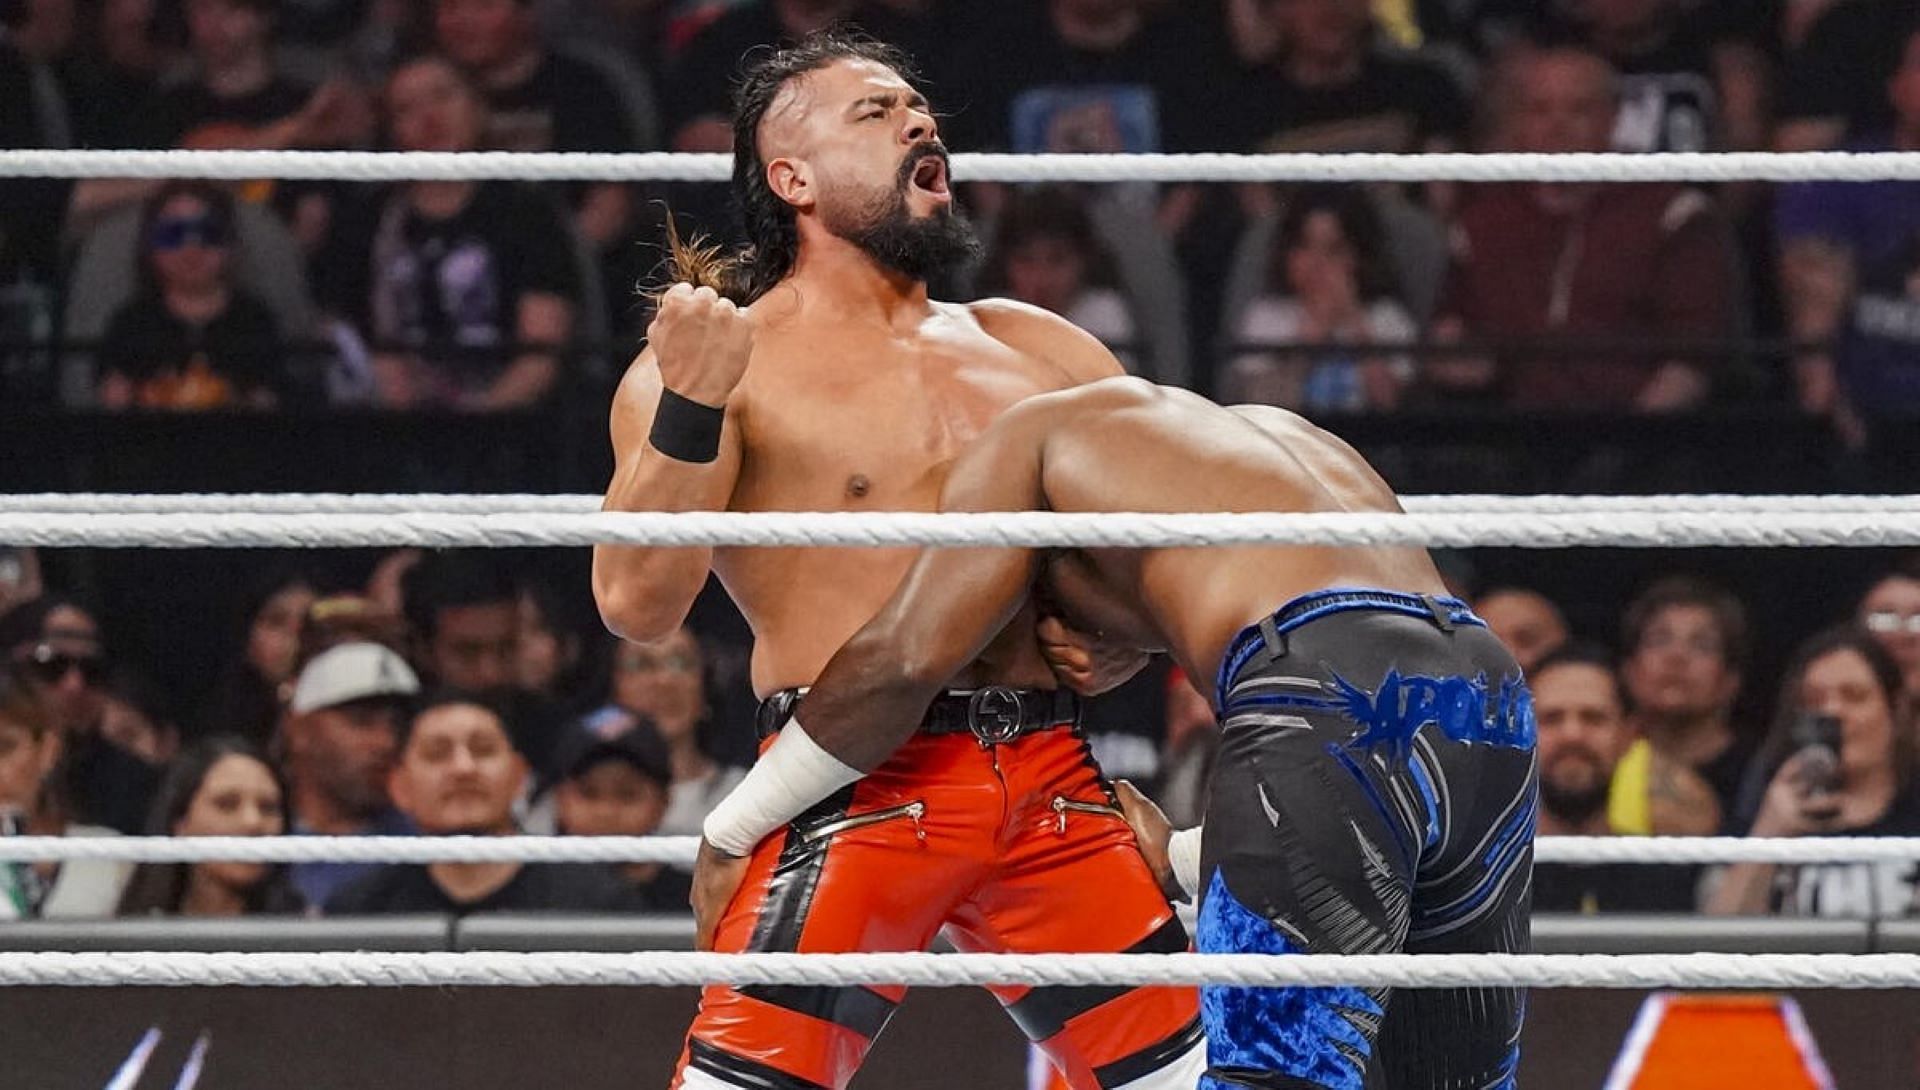 Andrade has won his first few back matches on WWE RAW